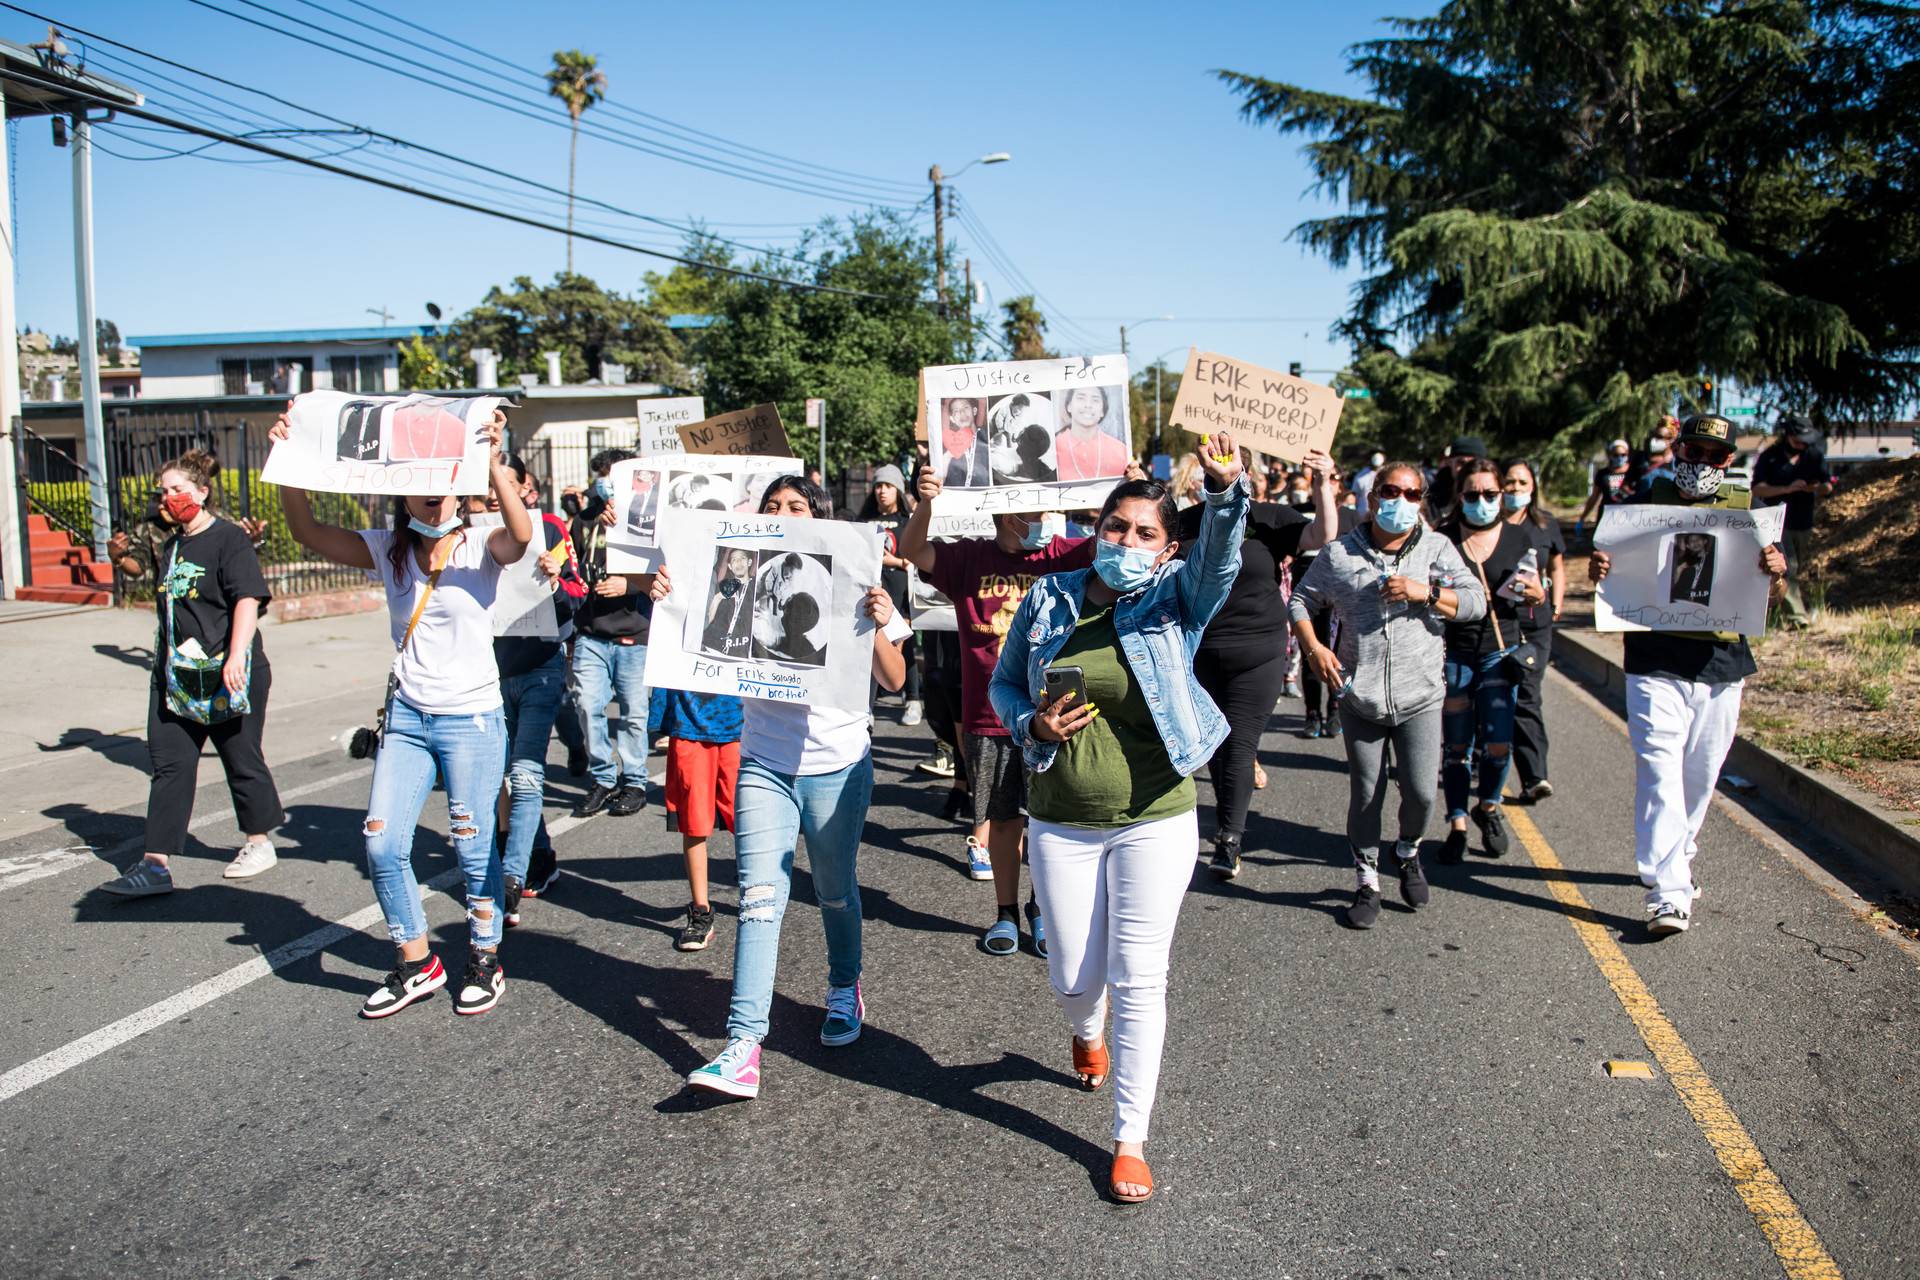 The family of Erik Salgado lead a large procession, marching from Elmhurst Middle School in East Oakland on Monday, June 8, to the site where Erik Salgado was shot and killed by California Highway Patrol officers this weekend. Beth LaBerge/KQED